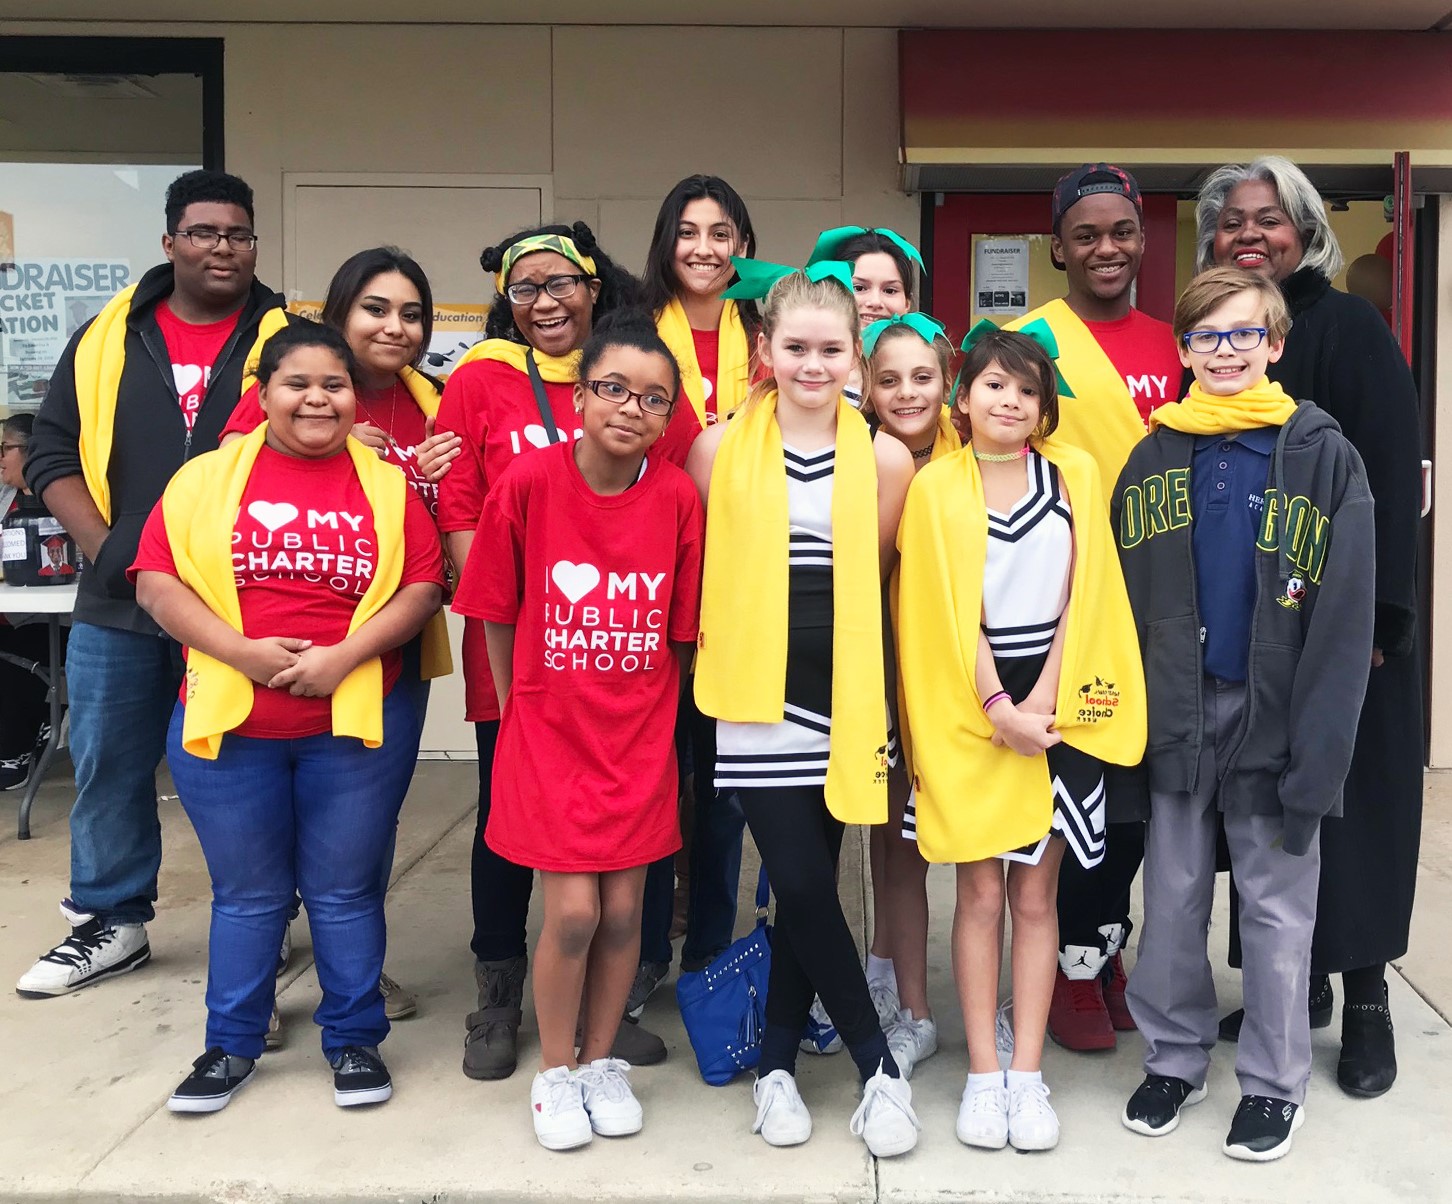 San Antonio Public Charter Schools Join Forces for National School Choice Week Rally